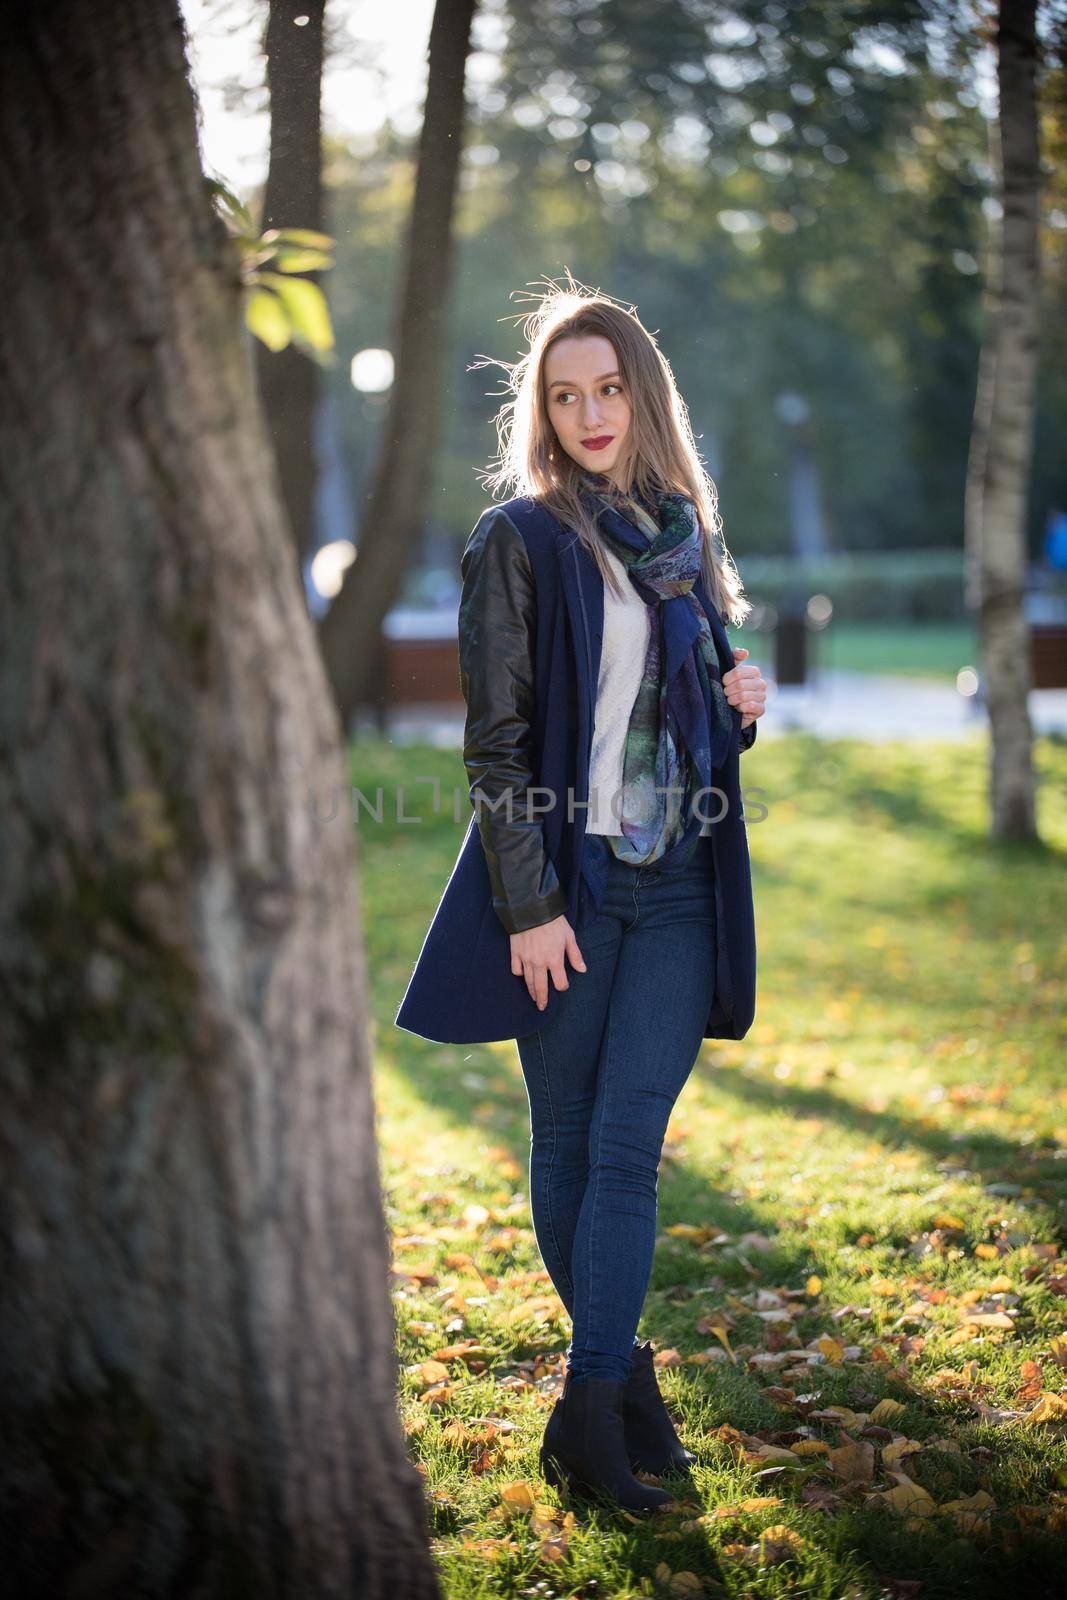 Beautiful girl with red lipstick standing in the park. Autumn. Fall season by Studia72